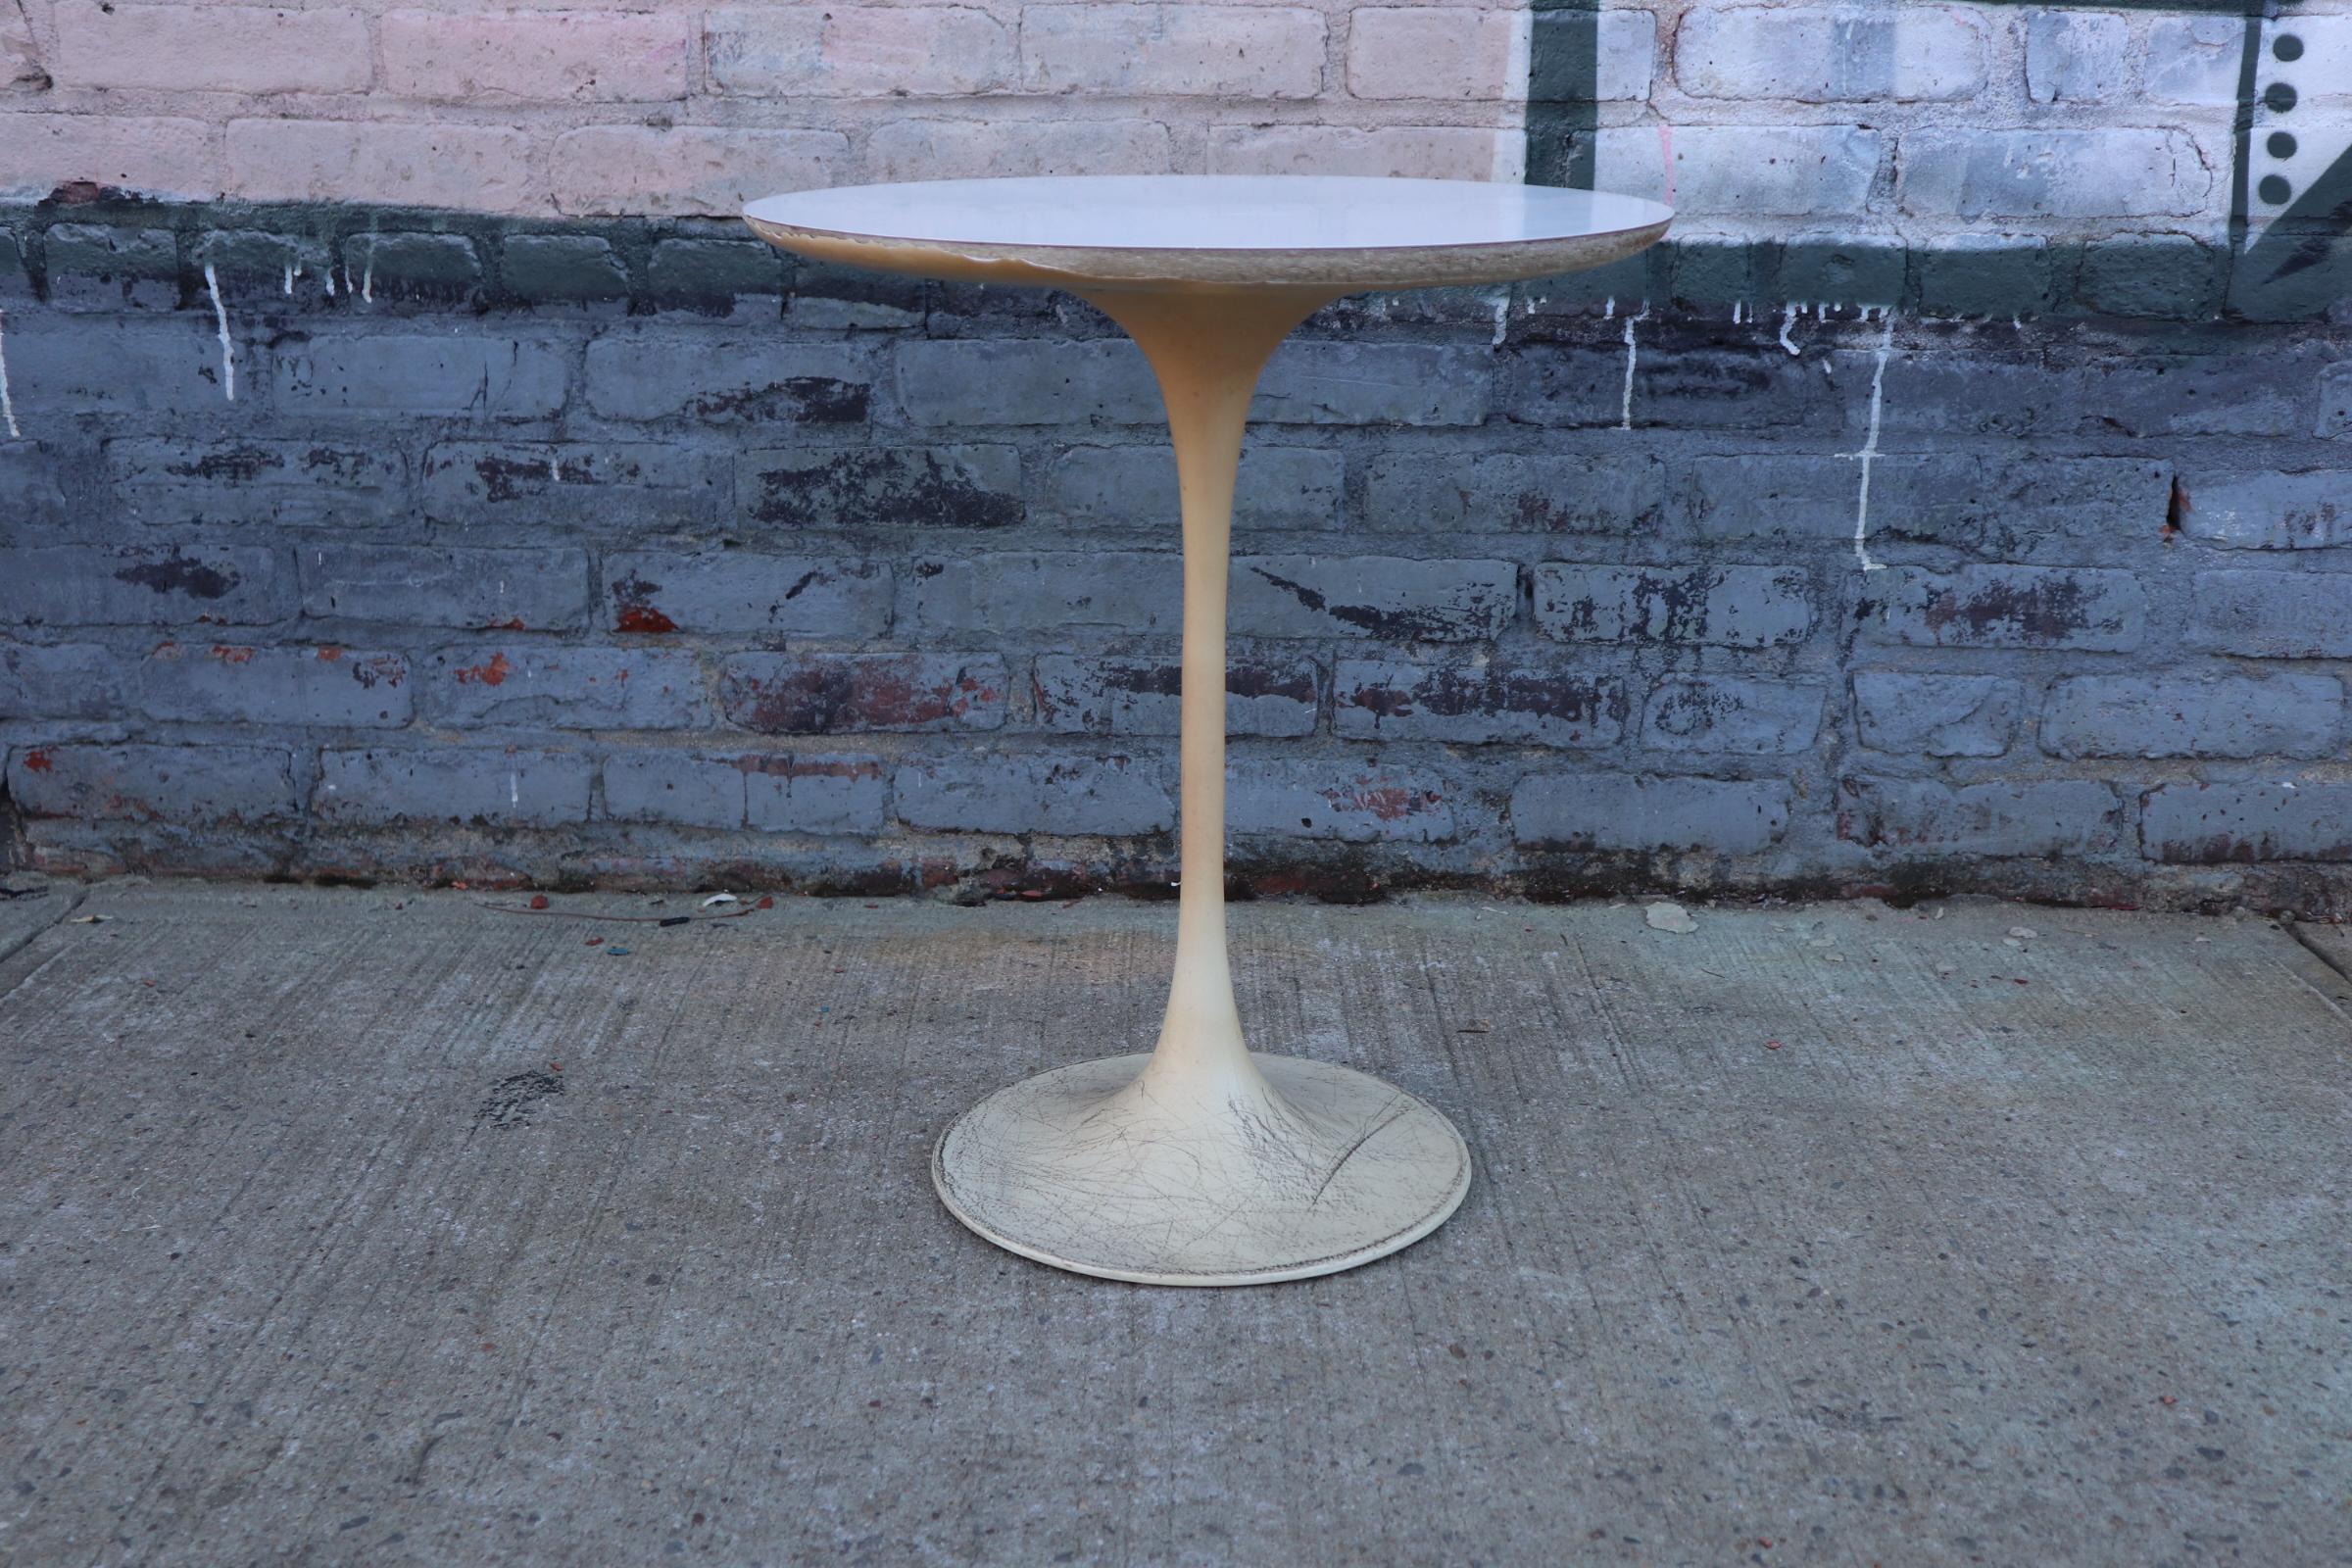 Pair of Saarinen style tulip tables by Burke. Wear along edges and gorgeous worn pint Patina to bases. Can be repainted for $199. Original pair in original condition. Laminate tops in great shape.